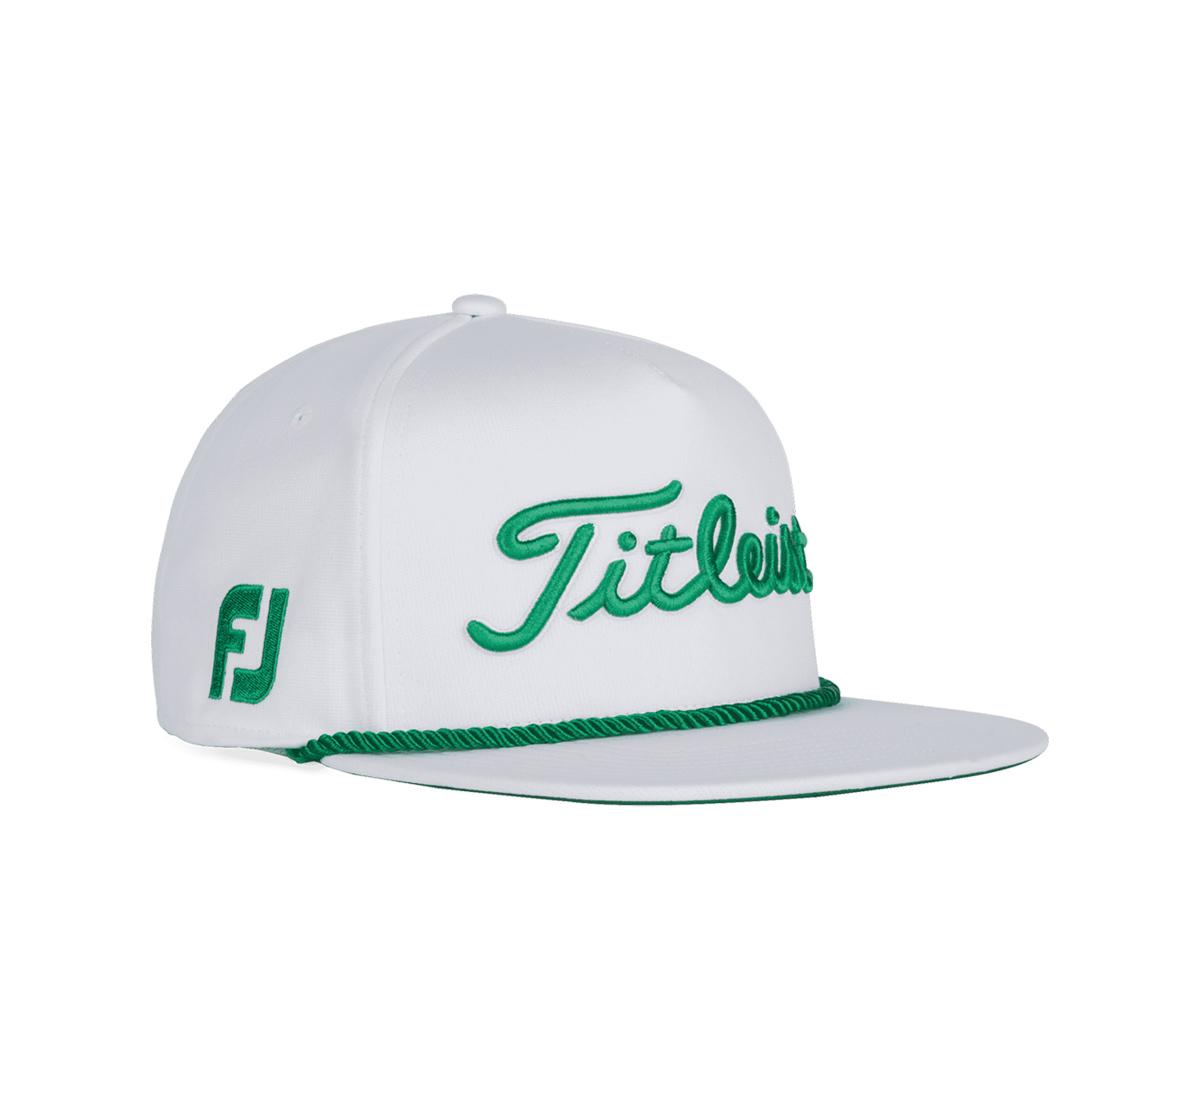 2021 Green Out Tour Rope Flat Bill Hat